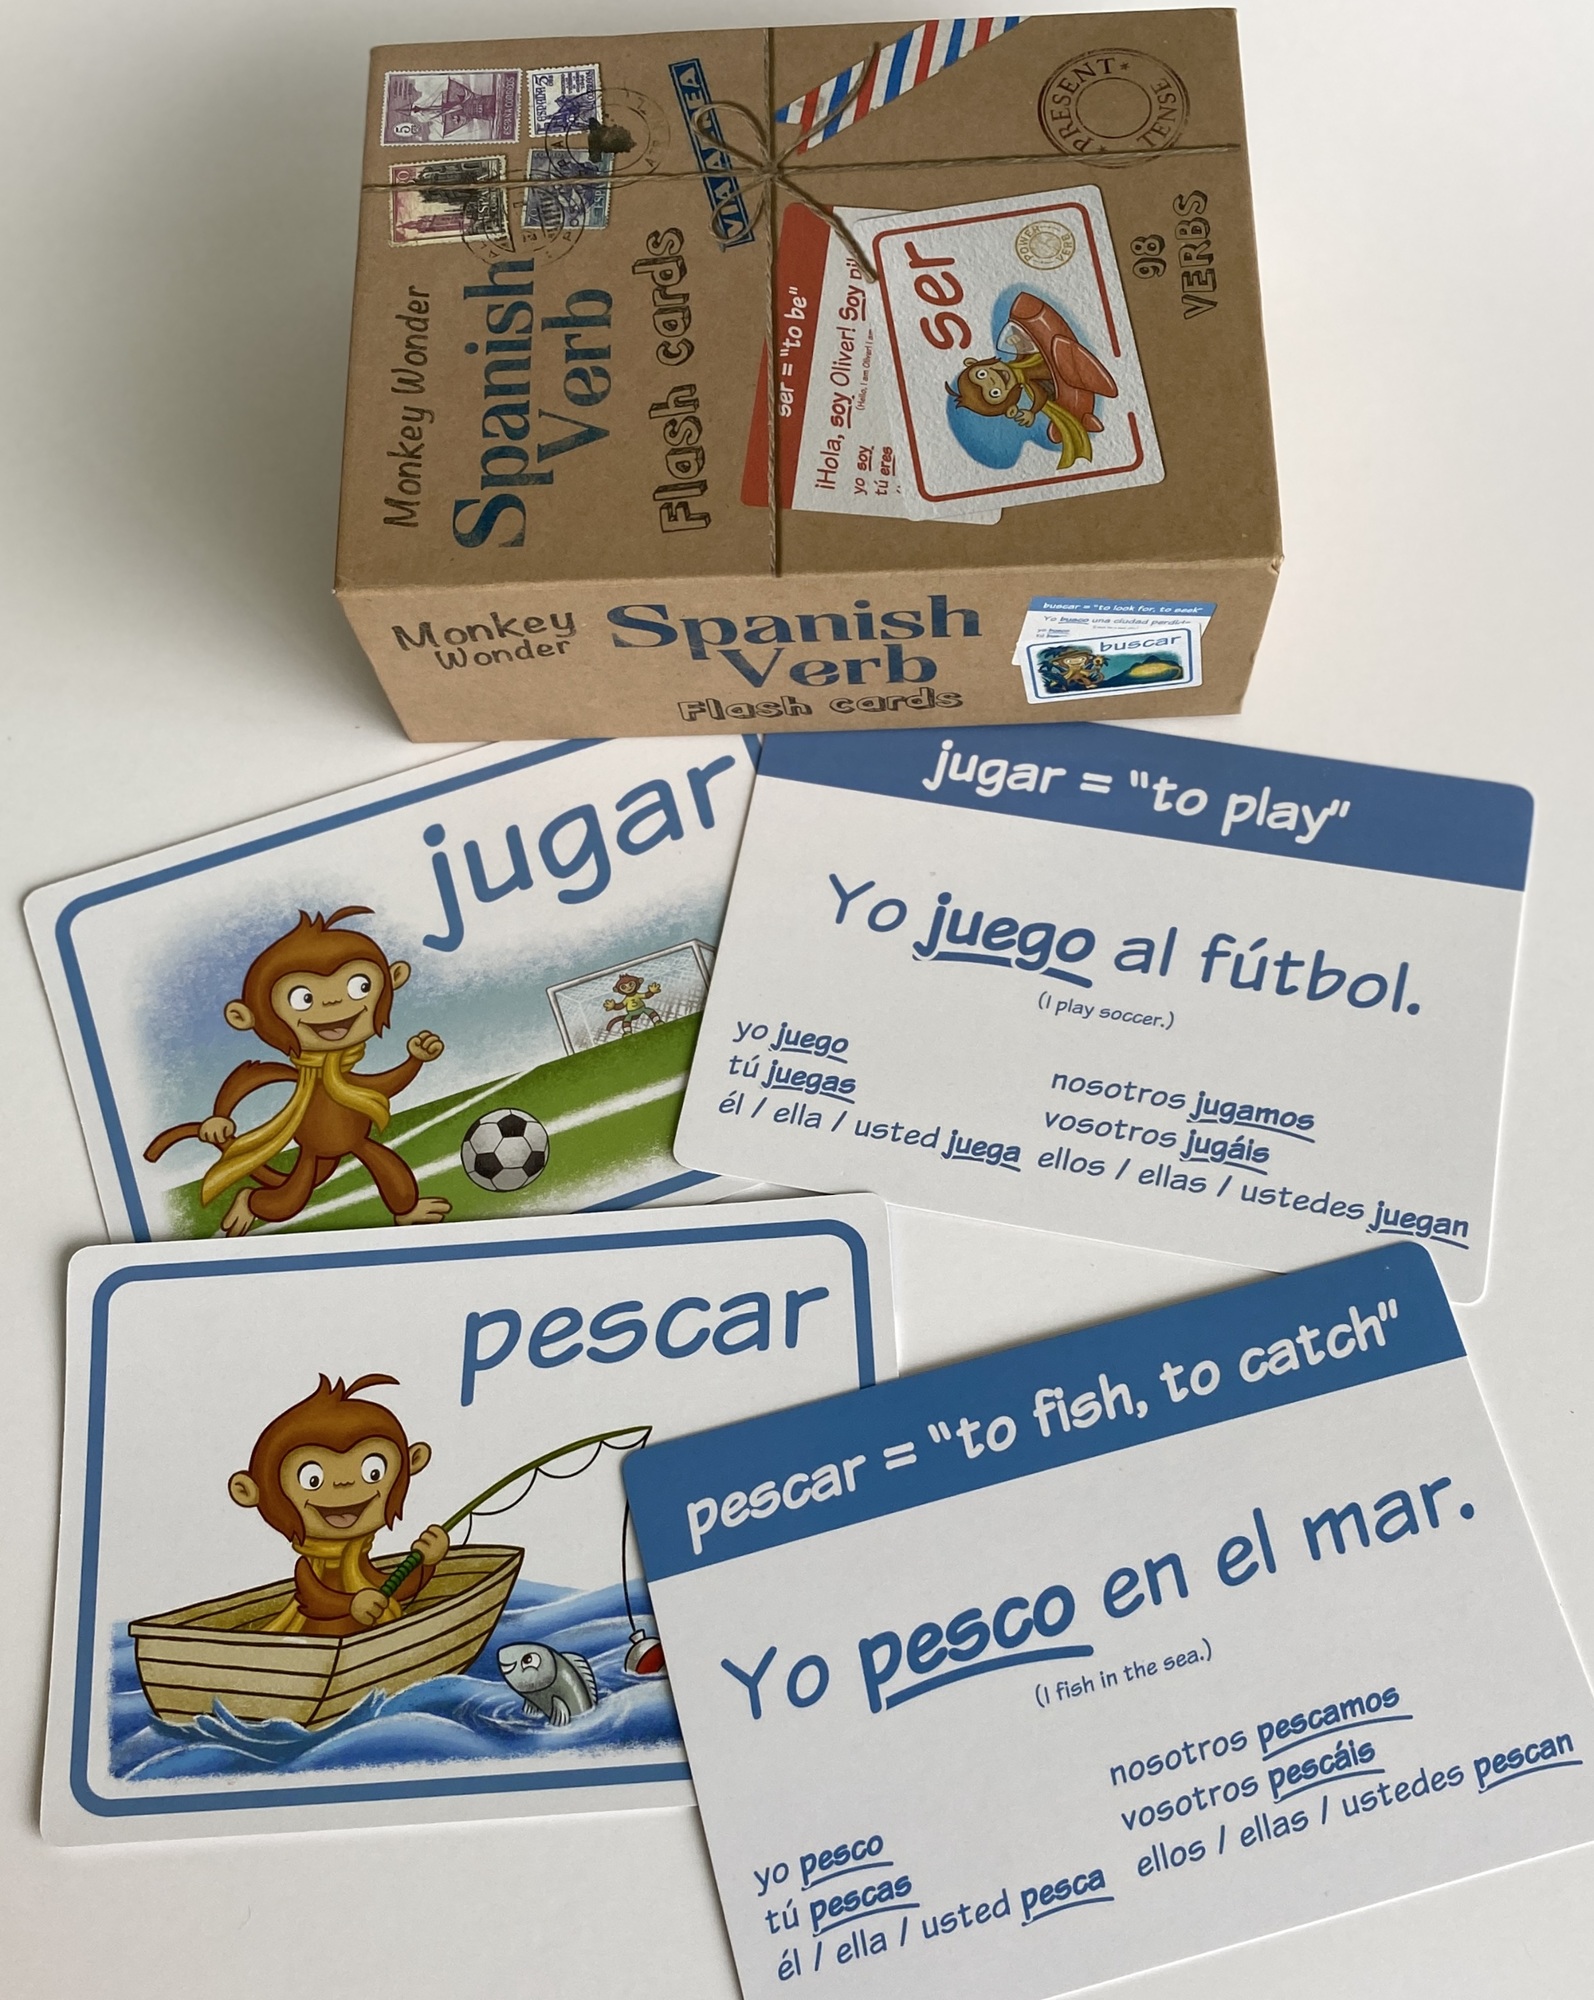 Monkey Wonder flash cards feature Oliver the Monkey, an engaging and artfully designed character who train and Latin America to showcase heritage, landmarks and culture. The cards are sold on Amazon for $18.95.